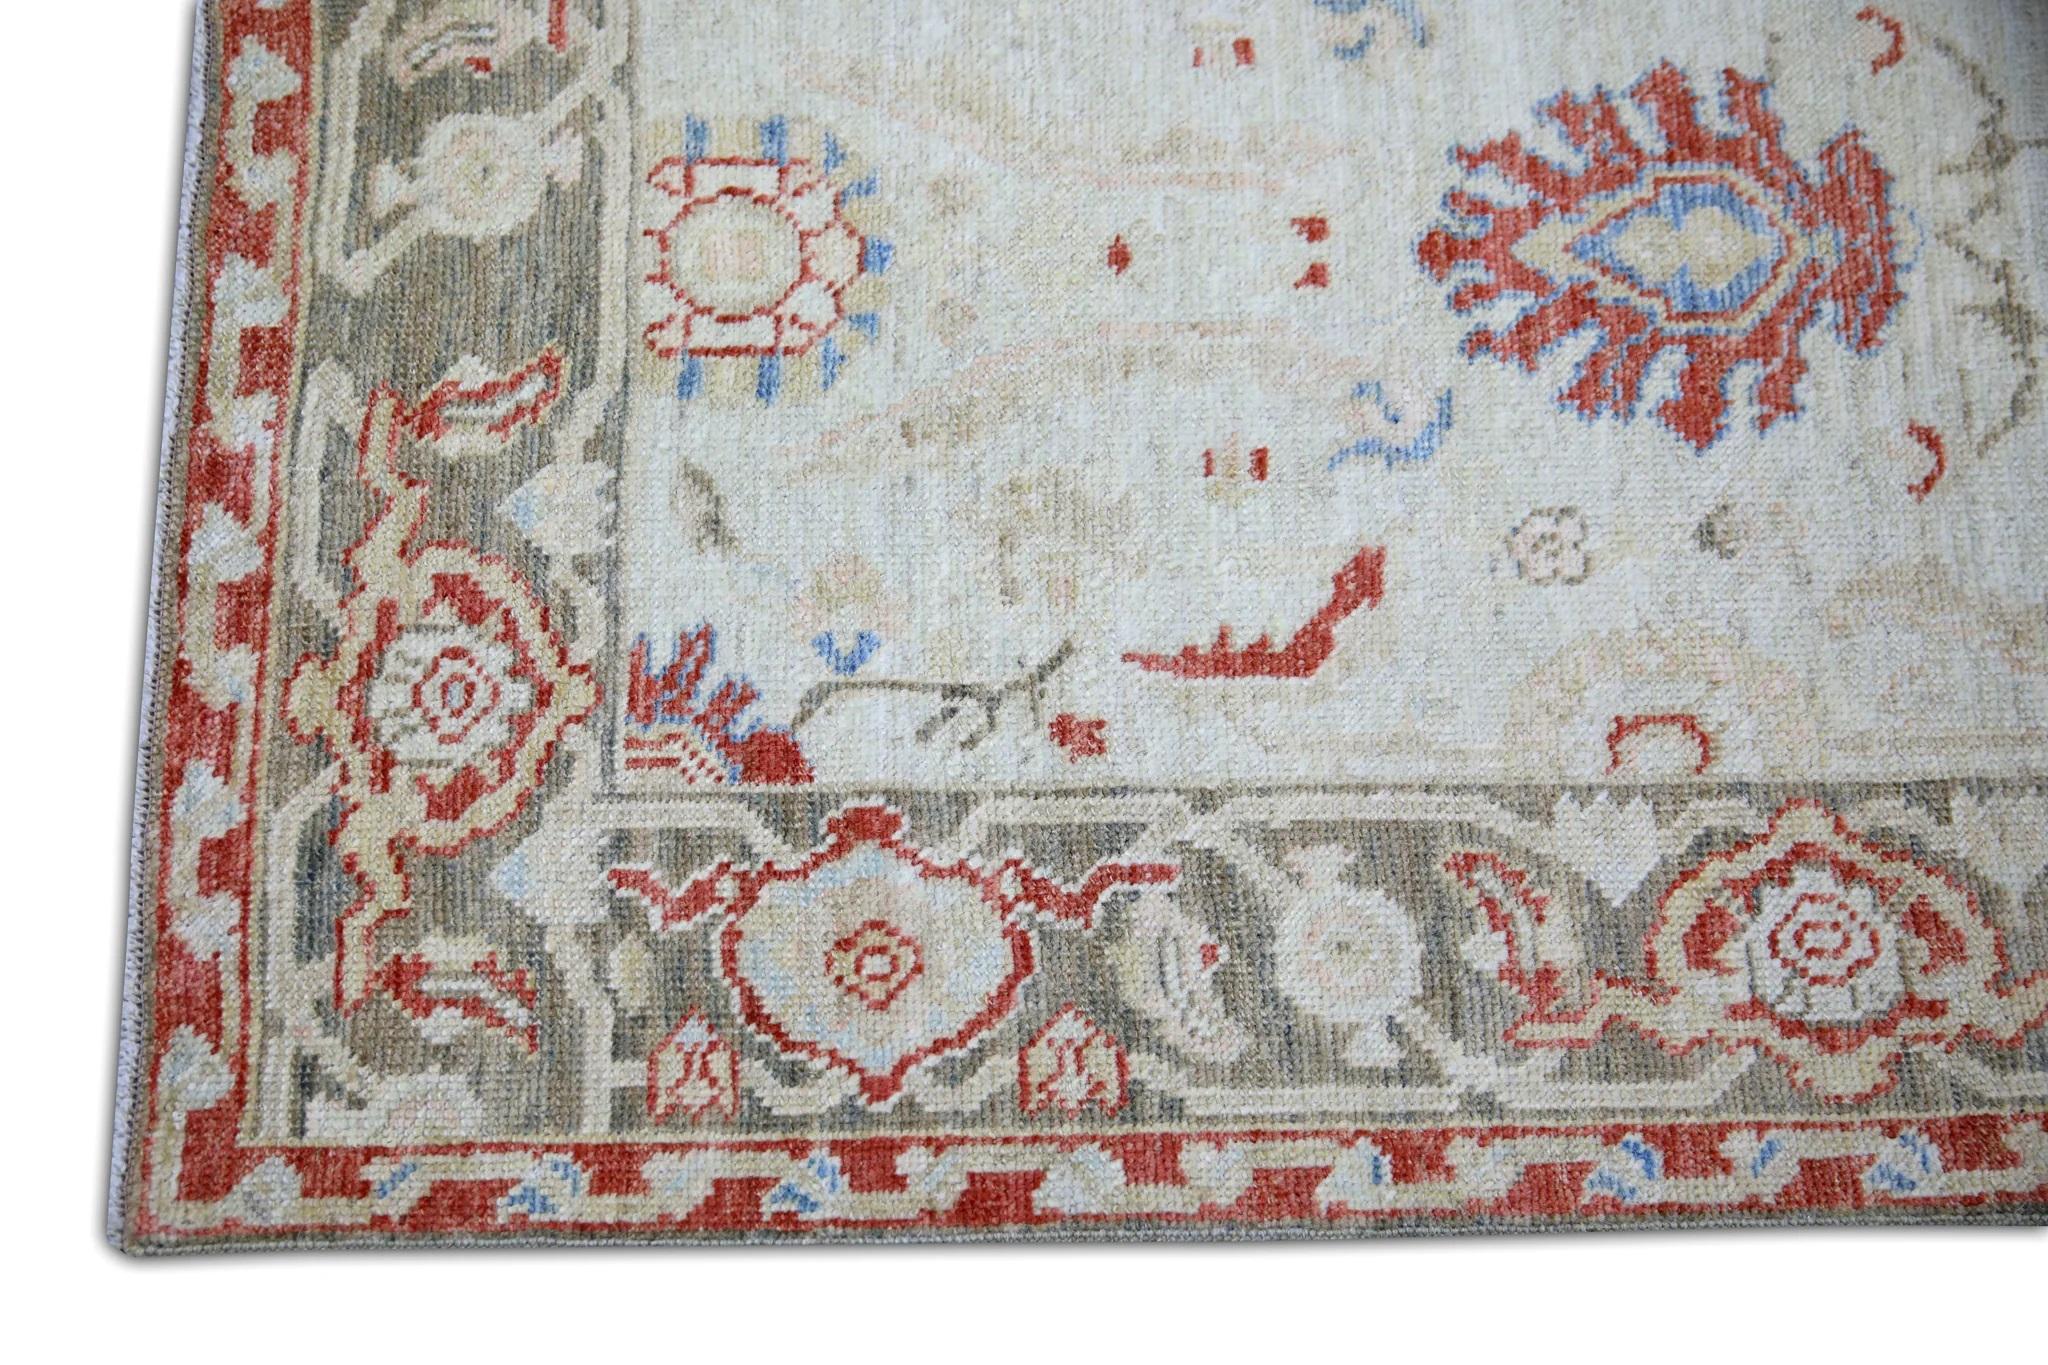 Vegetable Dyed Floral Turkish Finewoven Wool Oushak Rug in Red, Cream, and Green 2'8